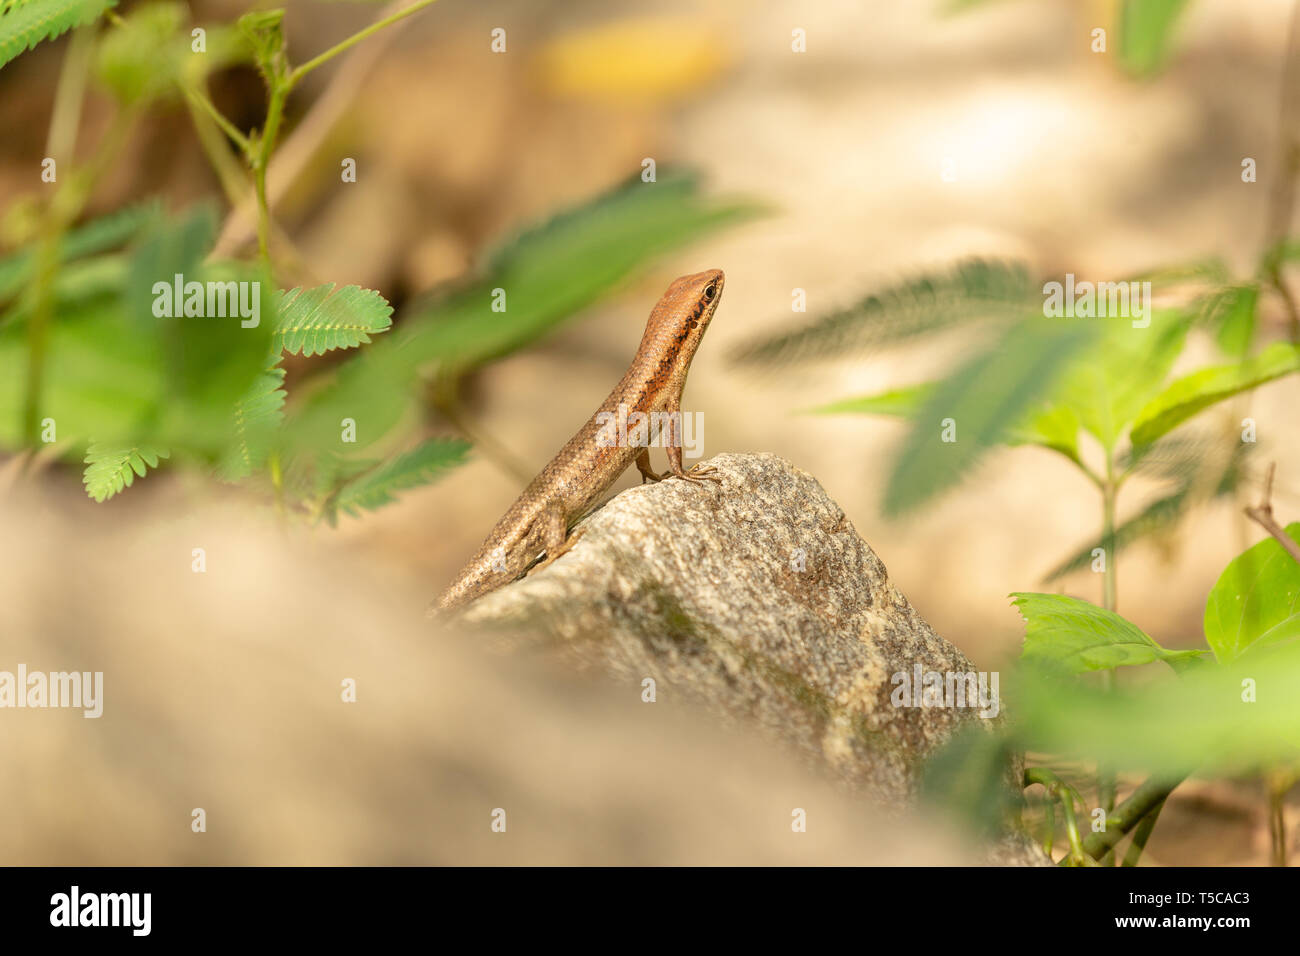 Lizard skink perched on a stone Stock Photo